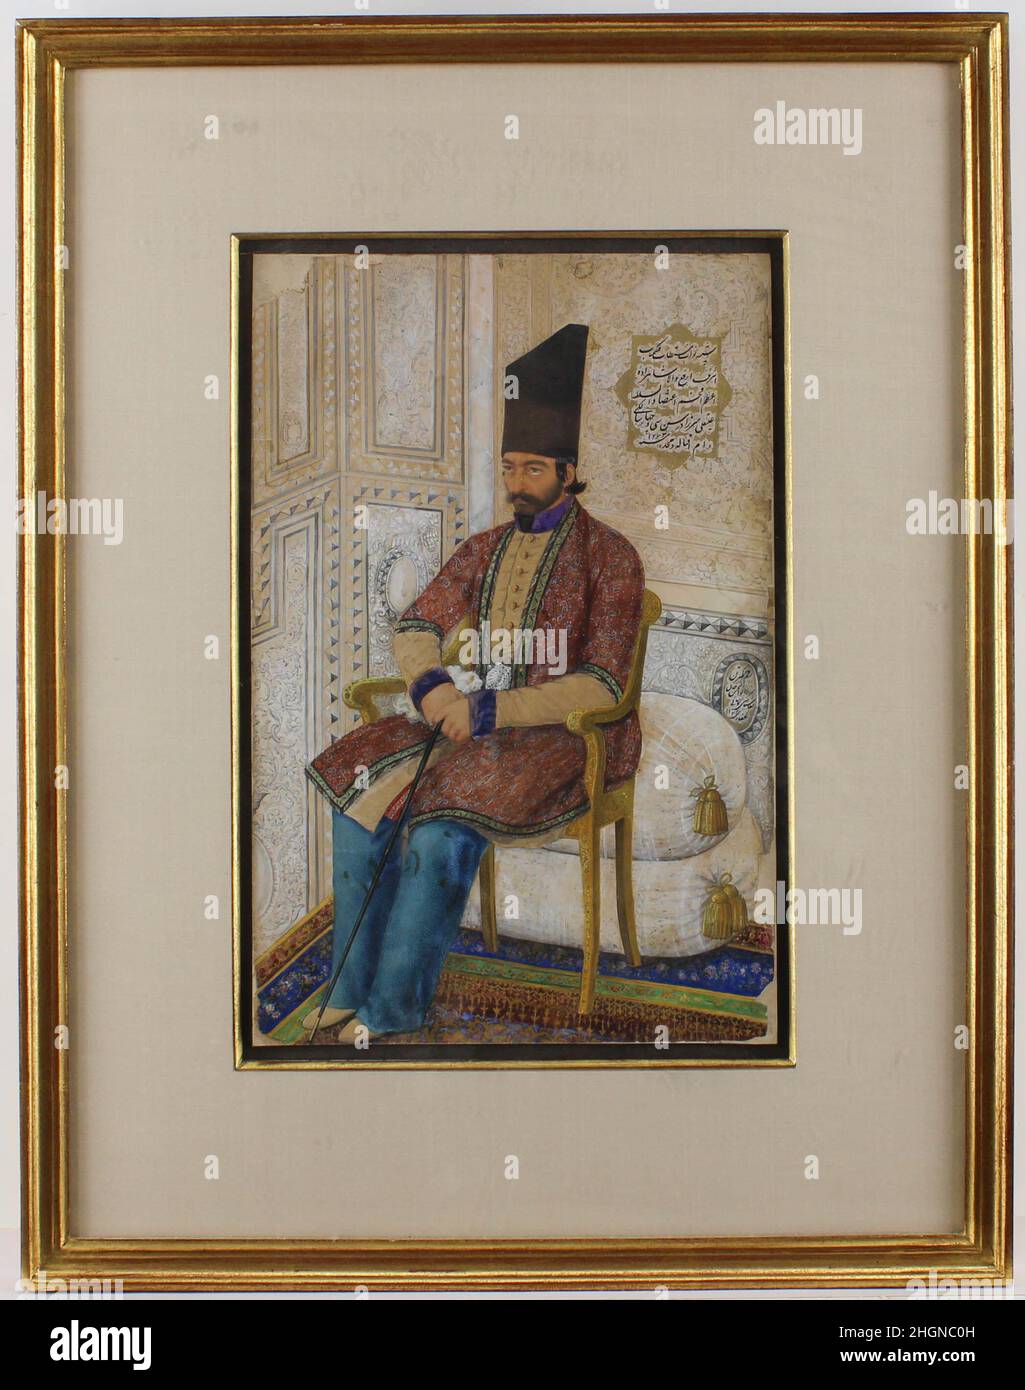 Portrait of `Ali Quli Mirza, I`tizad al-Saltana dated A.H. 1273/A.D. 1856–7 Abu`l Hasan Ghaffari, known as Sani' al-Mulk This fine portrait of prince 'Ali Quli Mirza I'tizad al-Saltana 54th son of the ruler Fath 'Ali Shah Qajar, Minister of Higher Education, and Director of the Dar al-Funun academy (Iran's first modern insitution of higher learning). It demonstrates the court artist Abu'l Hasan Ghaffari's extraordinary skills in rendering naturalistic portraits that capture the sitter's psychological state. Here, the artist has devoted attention to a lavishly decorated interior of carved plast Stock Photo